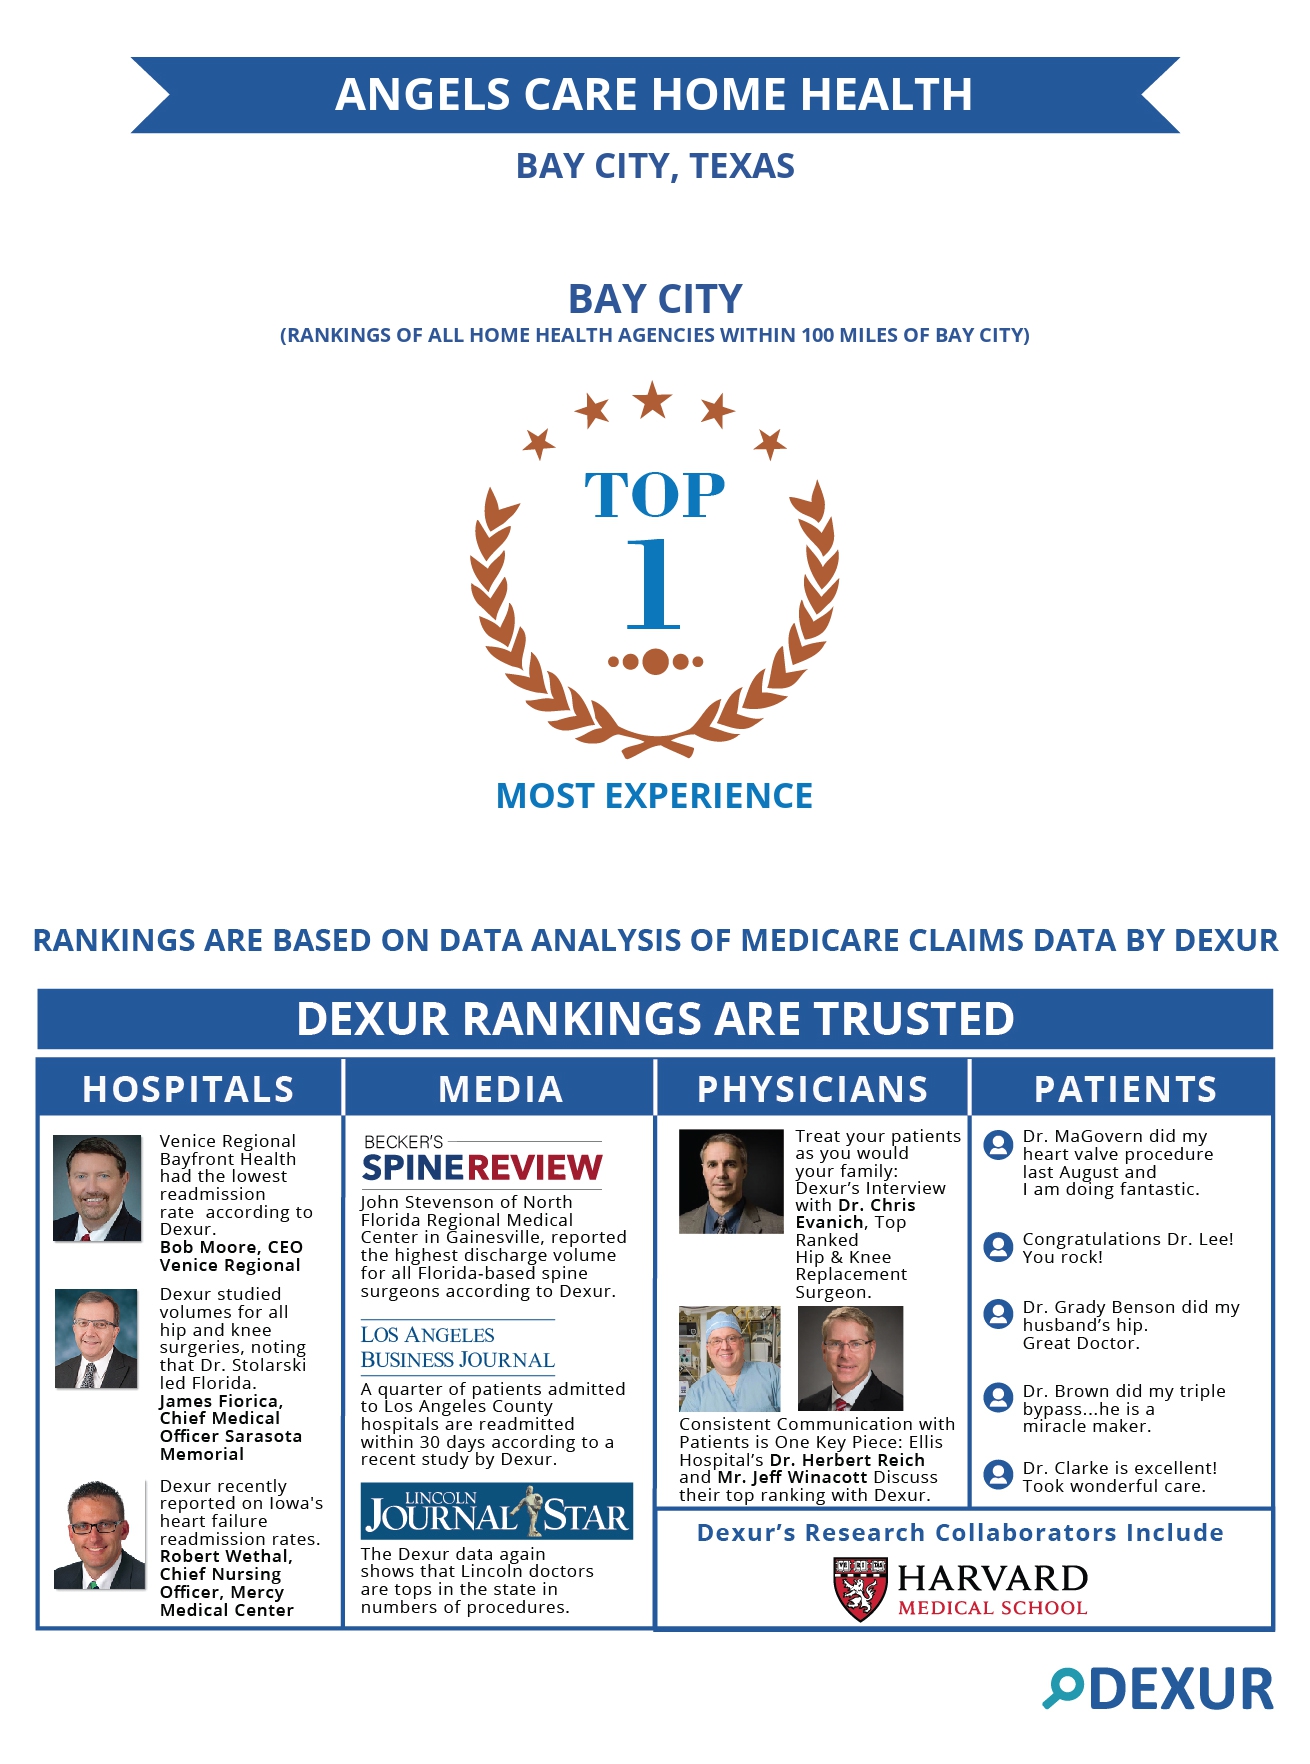 Angels Care Home Health Is Among The Top Ranked Home Health Agencies Within 100 Miles From Bay City Tx Based On Case Volume